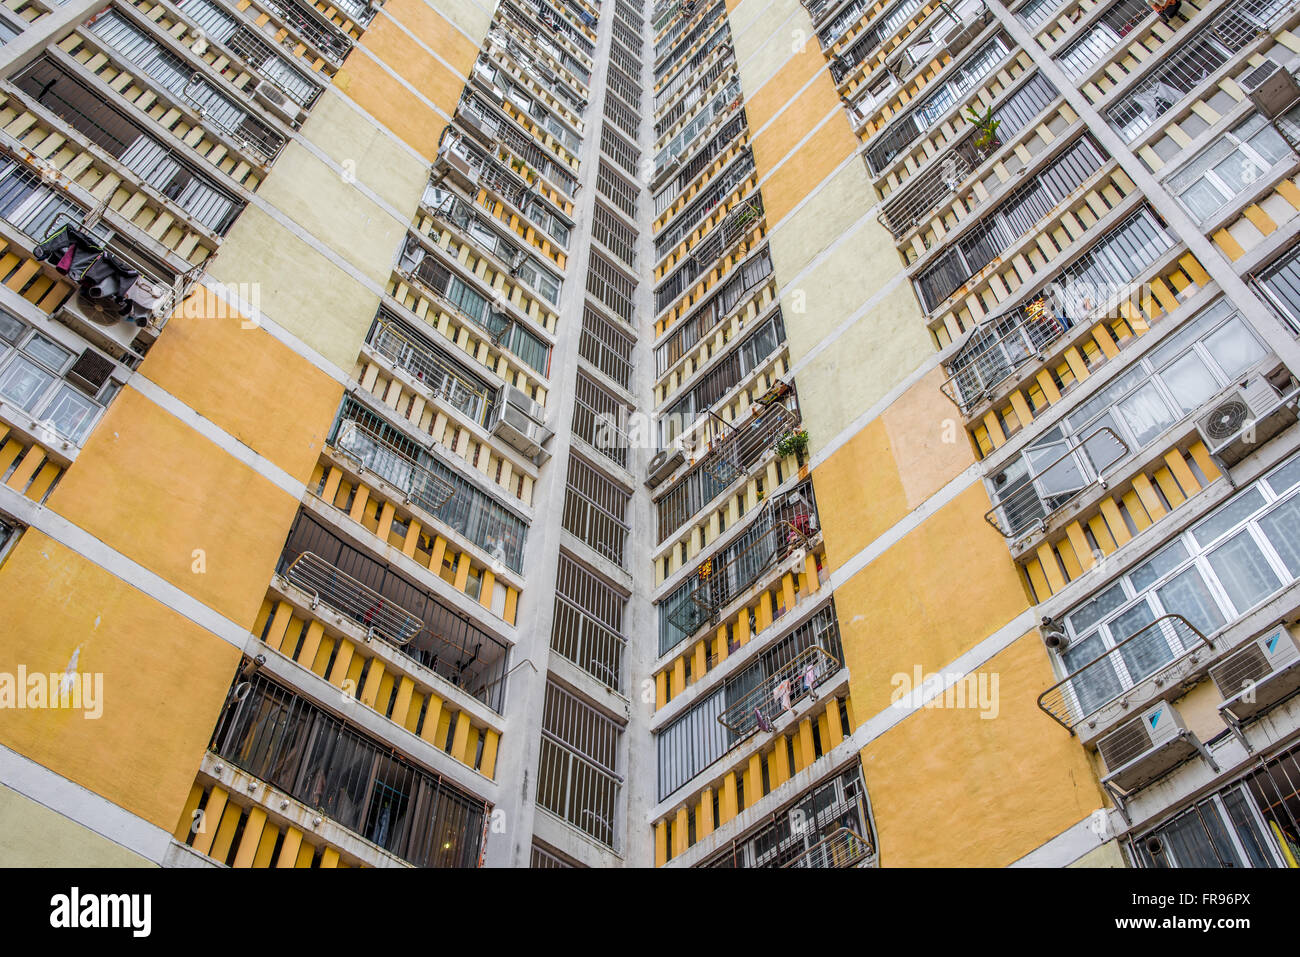 Hong Kong public estate built by Government Stock Photo